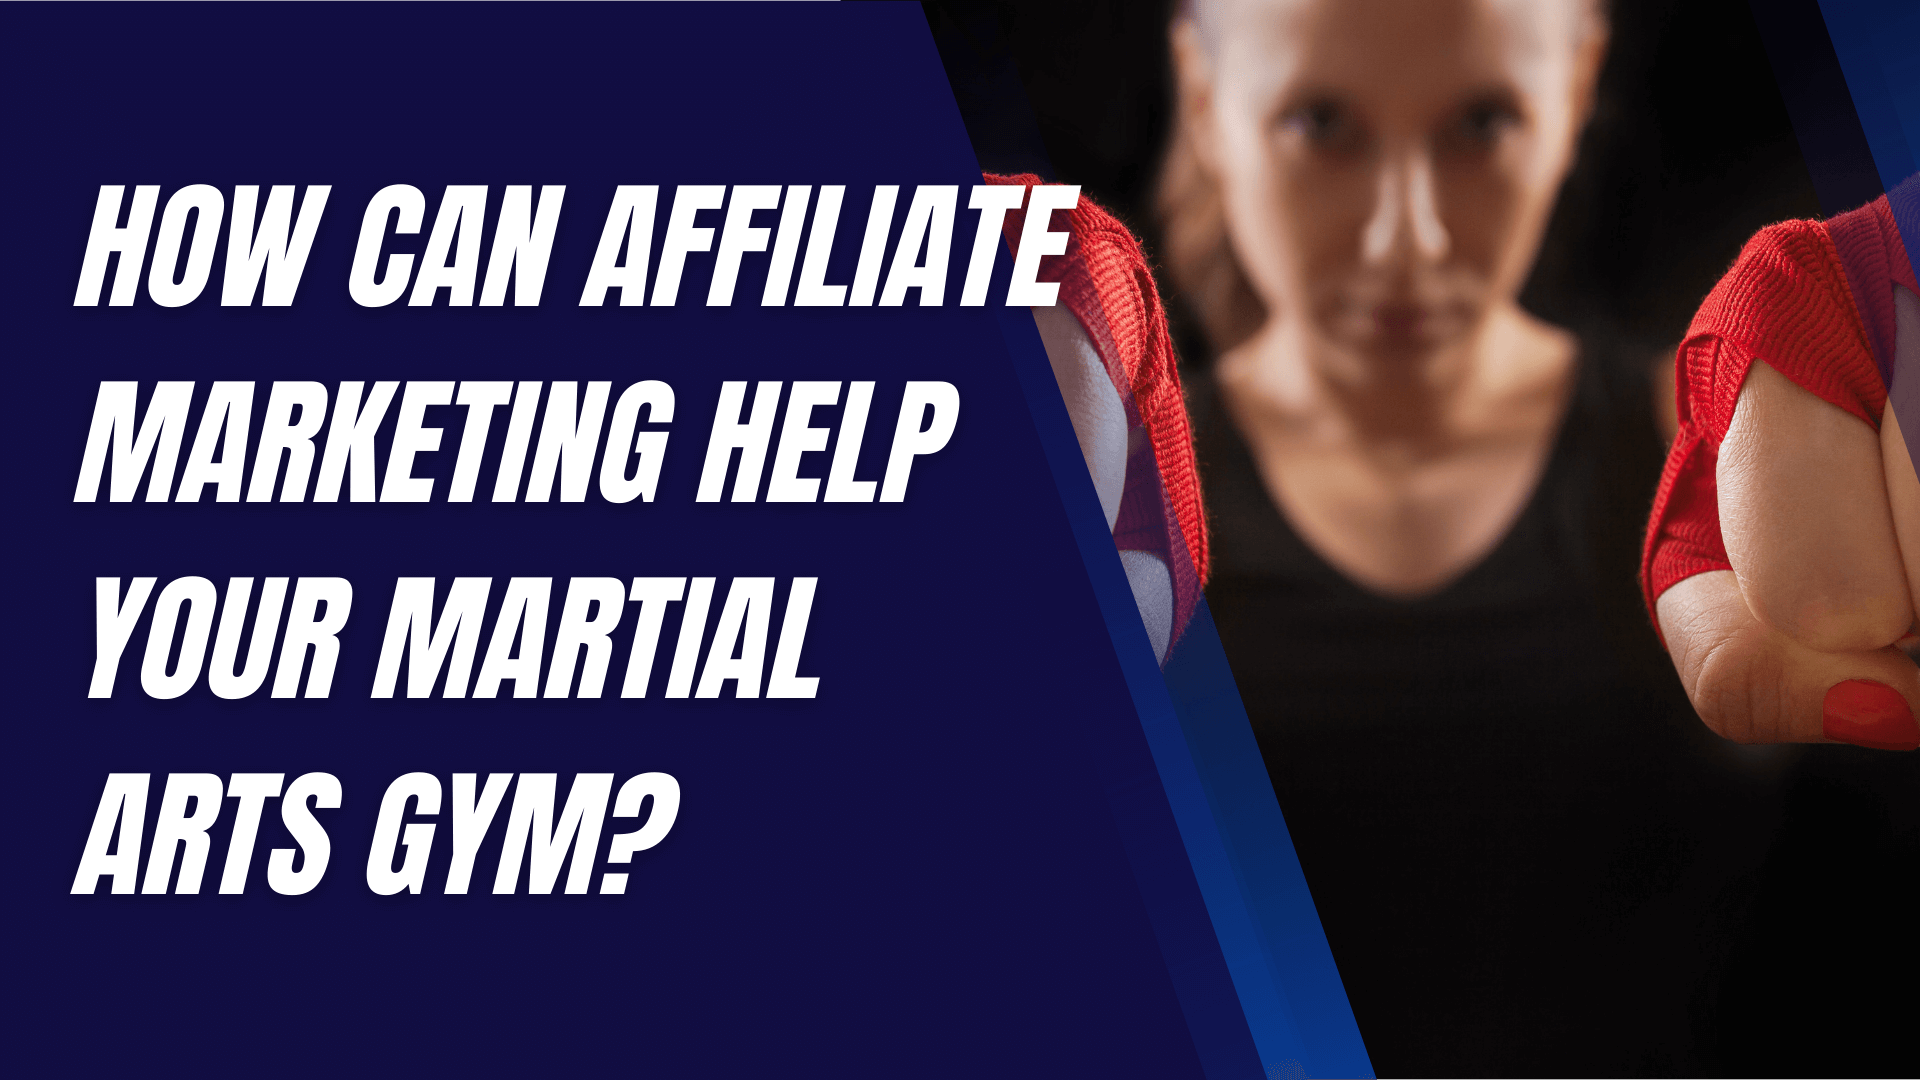 How Can Affiliate Marketing Help Your Martial Arts Gym?